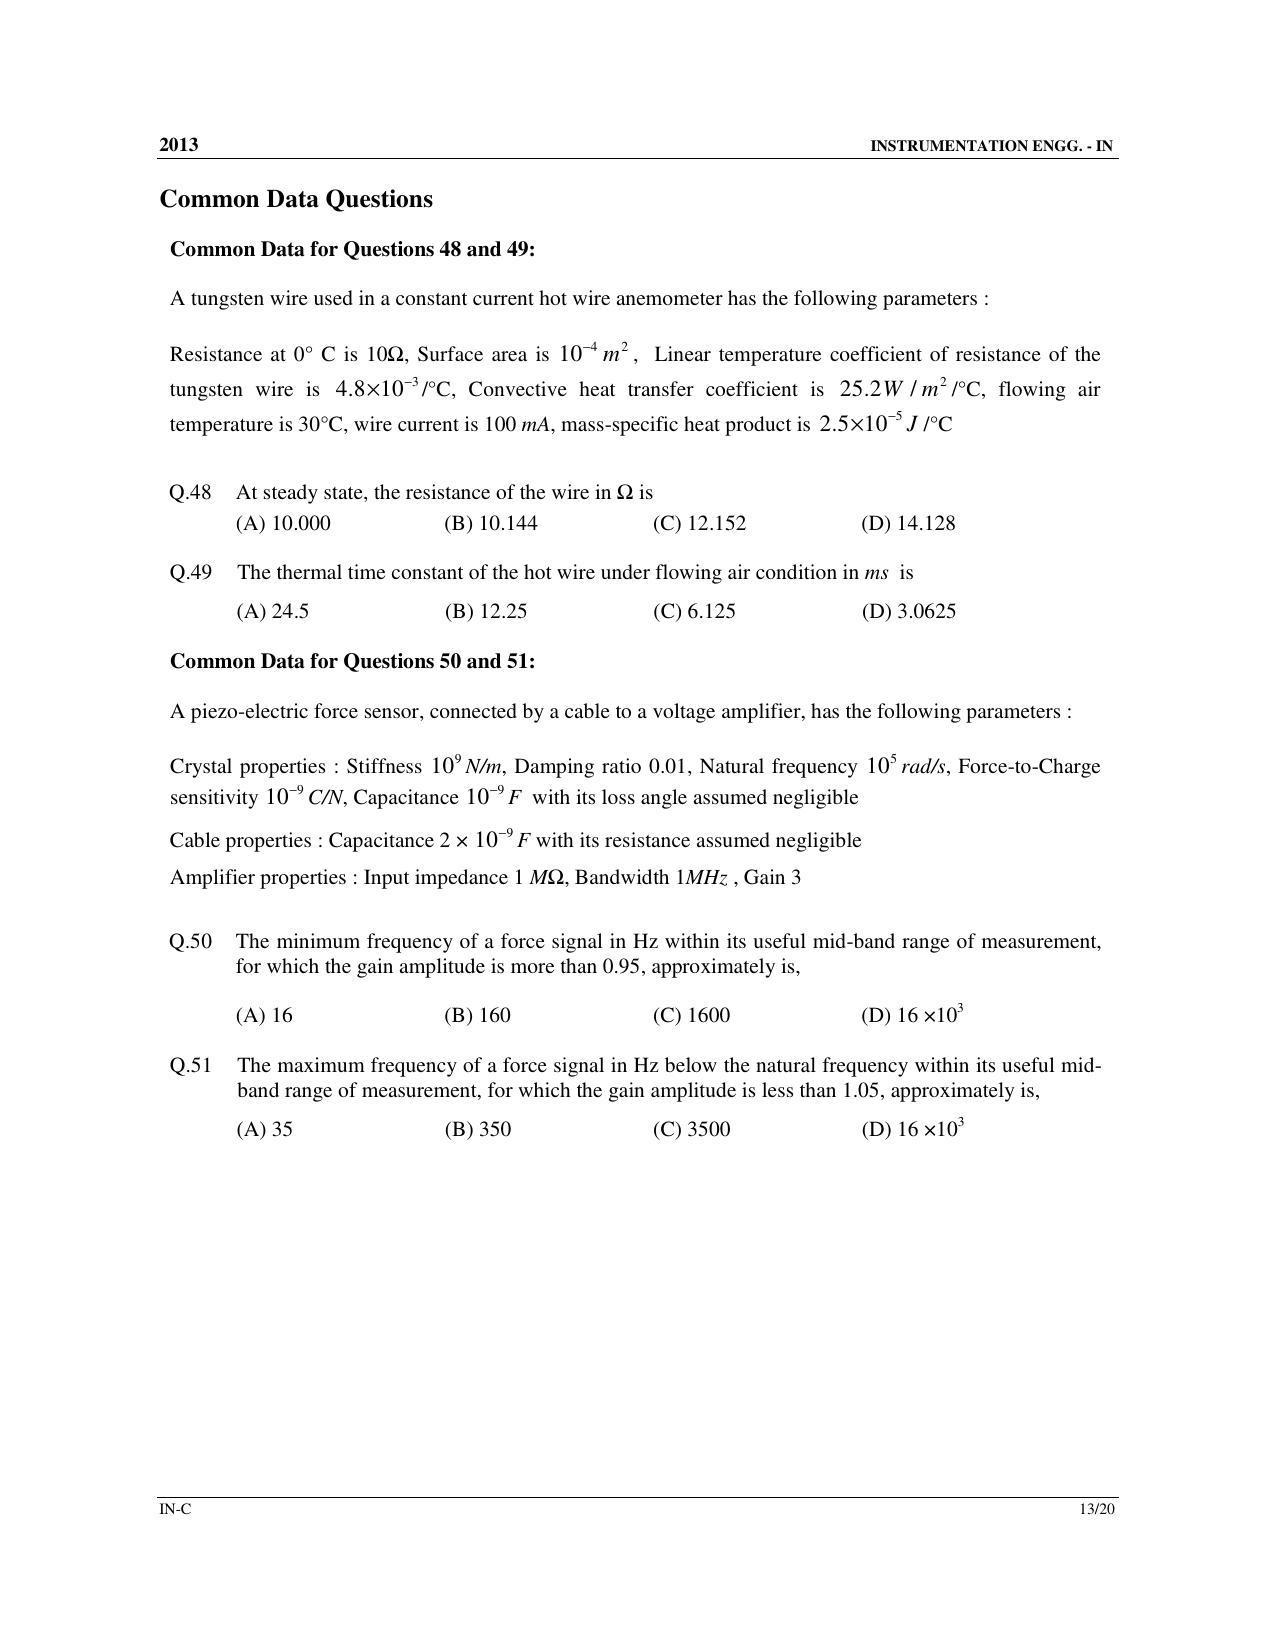 GATE 2013 Instrumentation Engineering (IN) Question Paper with Answer Key - Page 48